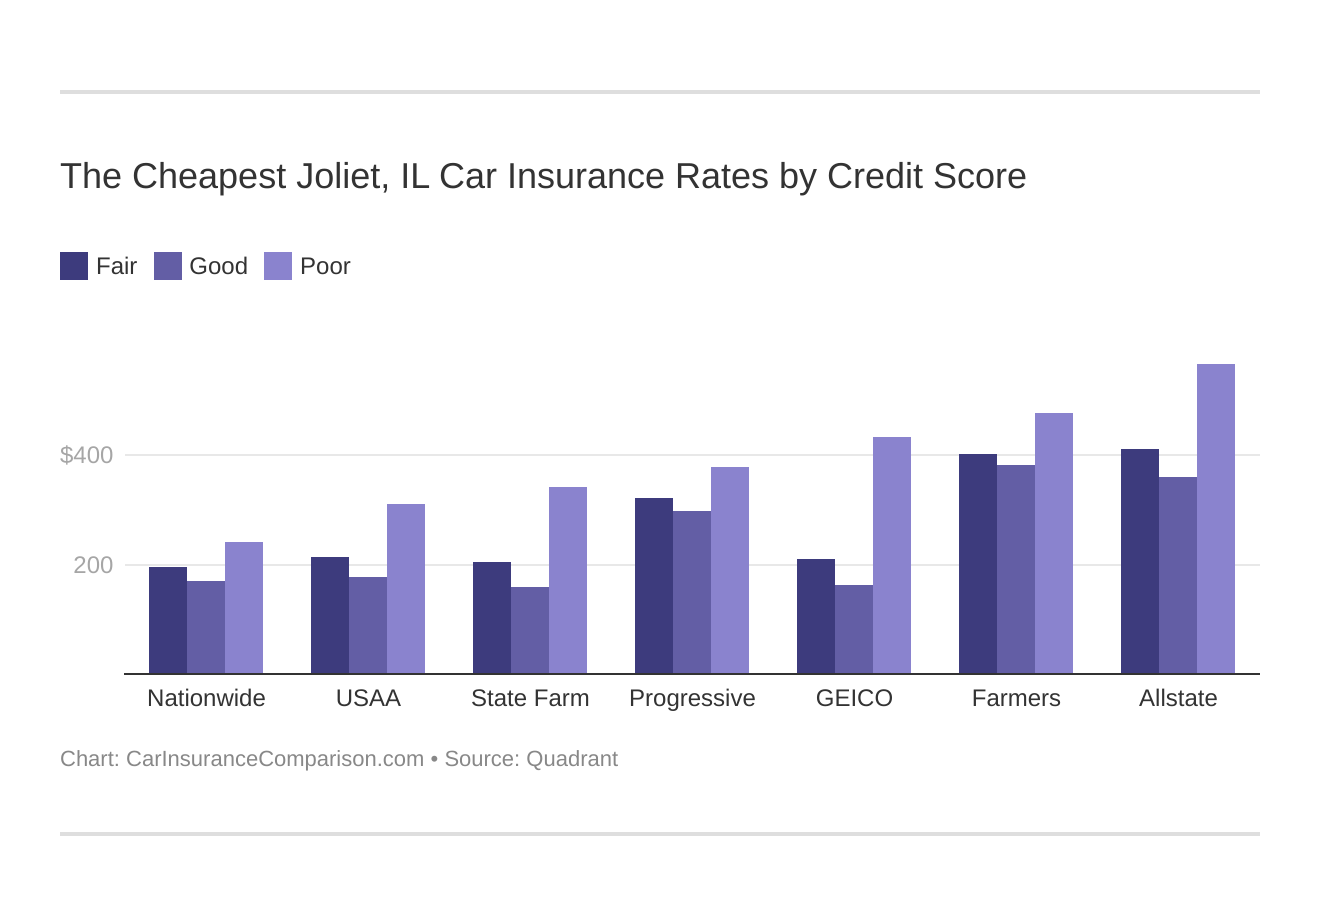 The Cheapest Joliet, IL Car Insurance Rates by Credit Score